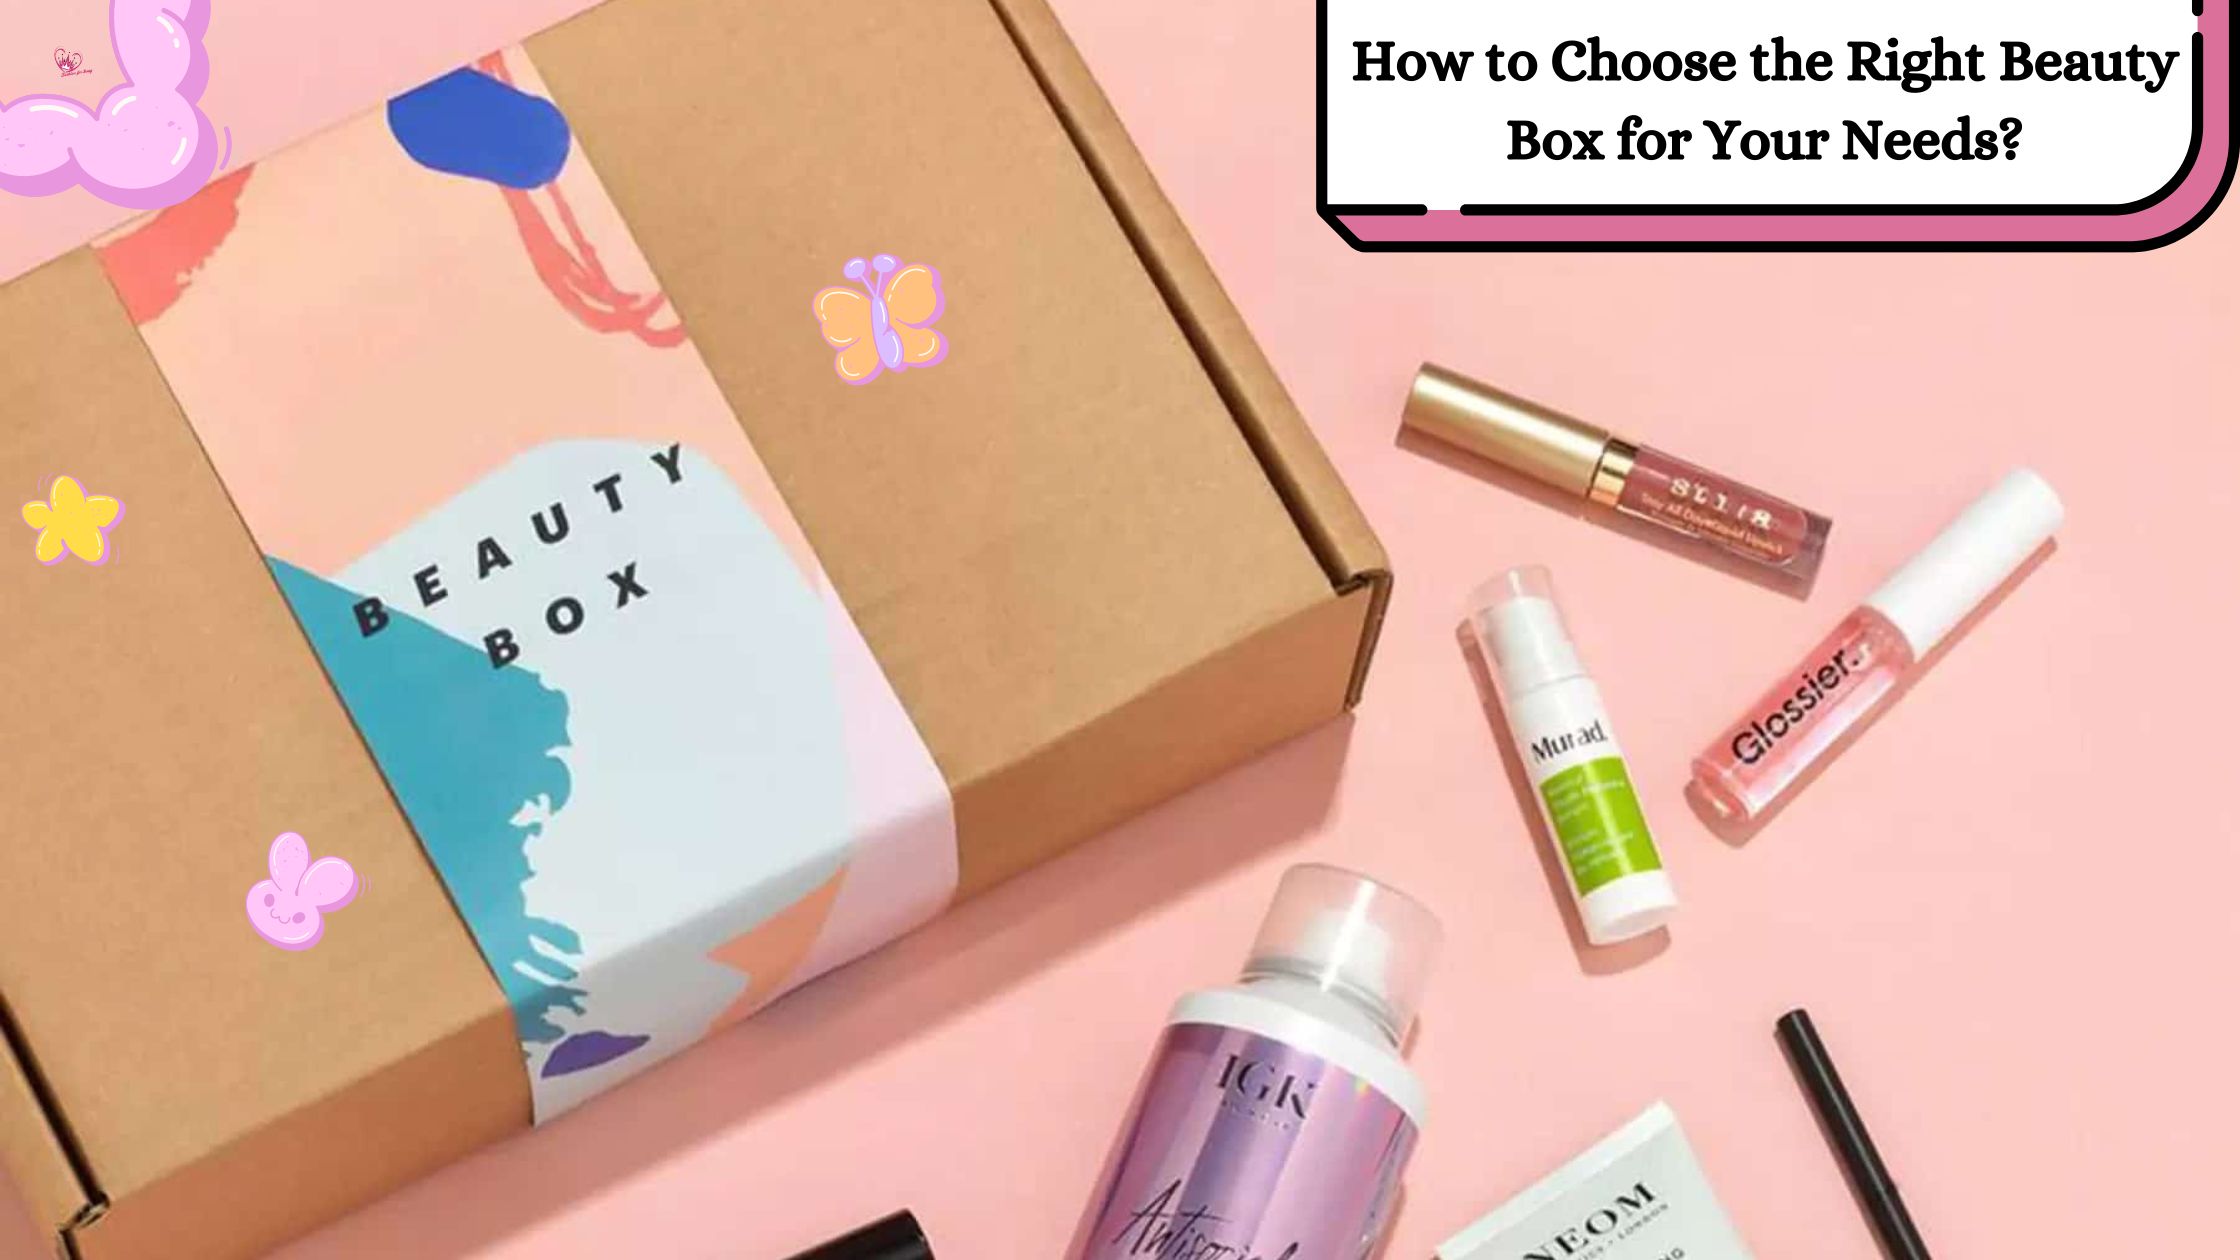 How to Choose the Right Beauty Box for Your Needs?